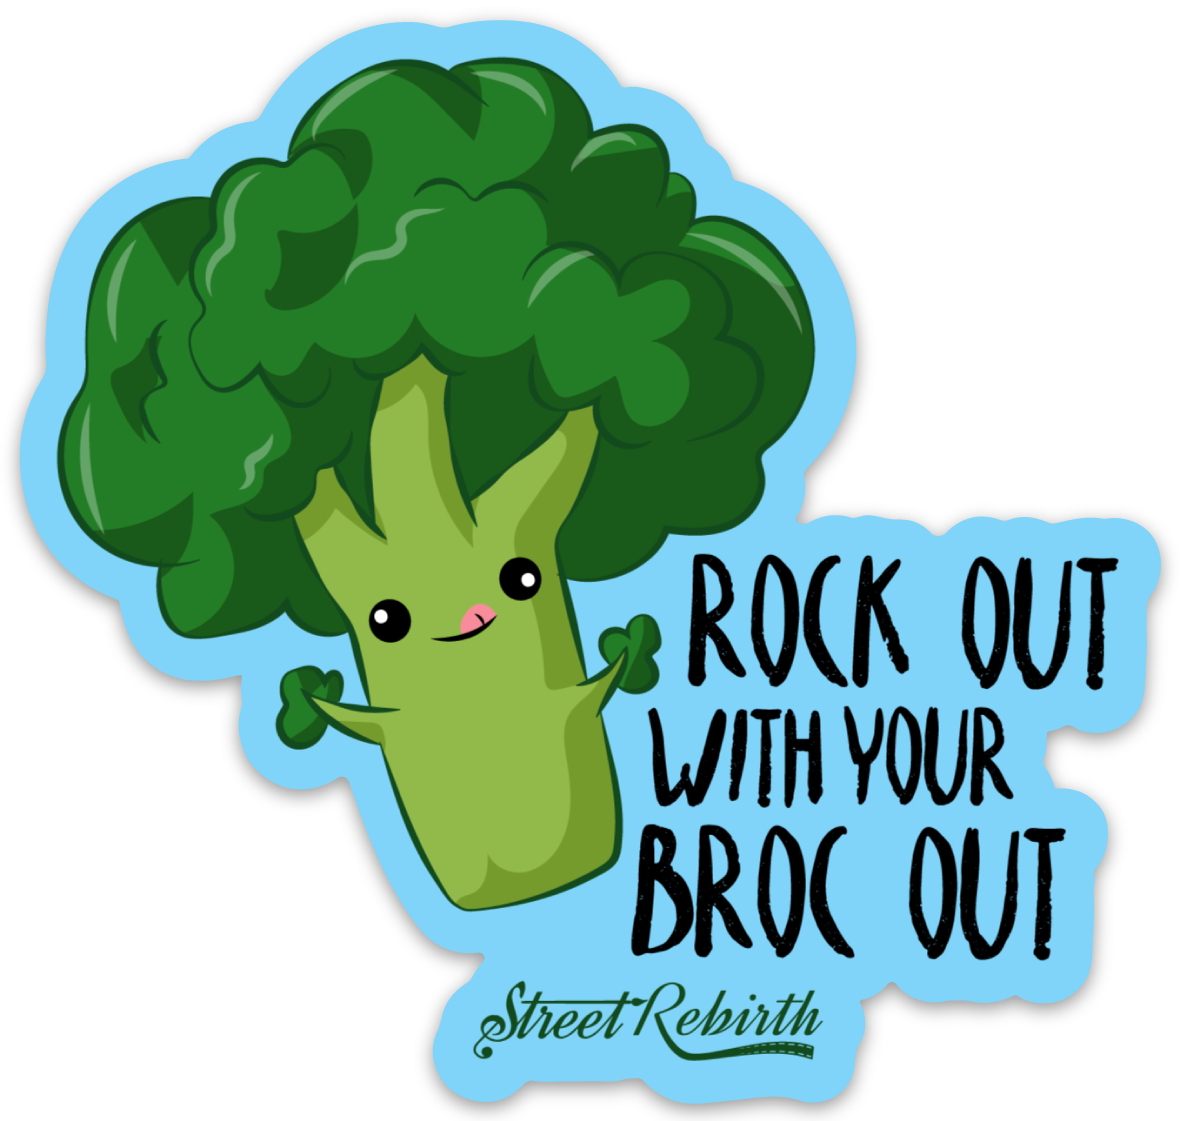 Rock Out with Your Broc Out PUN STICKER – ONE 4 INCH WATER PROOF VINYL STICKER – FOR HYDRO FLASK, SKATEBOARD, LAPTOP, PLANNER, CAR, COLLECTING, GIFTING